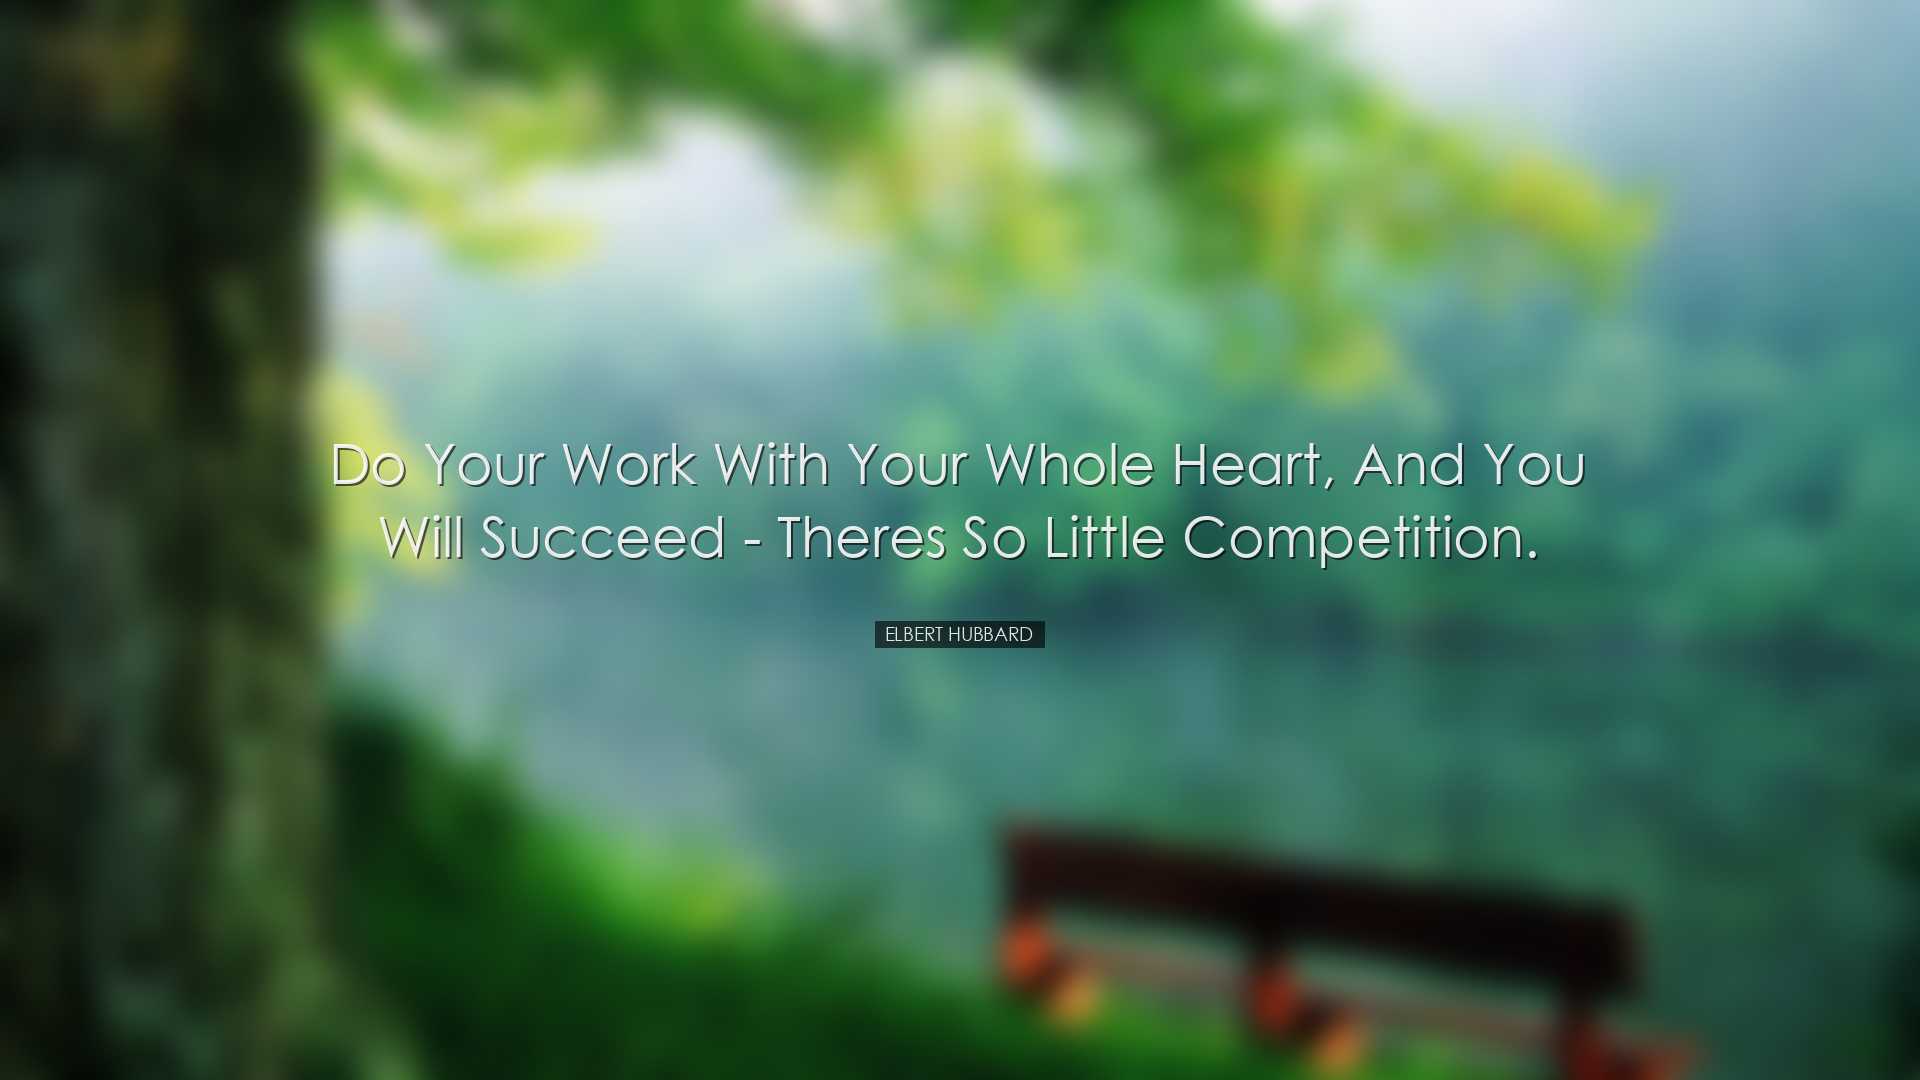 Do your work with your whole heart, and you will succeed - theres